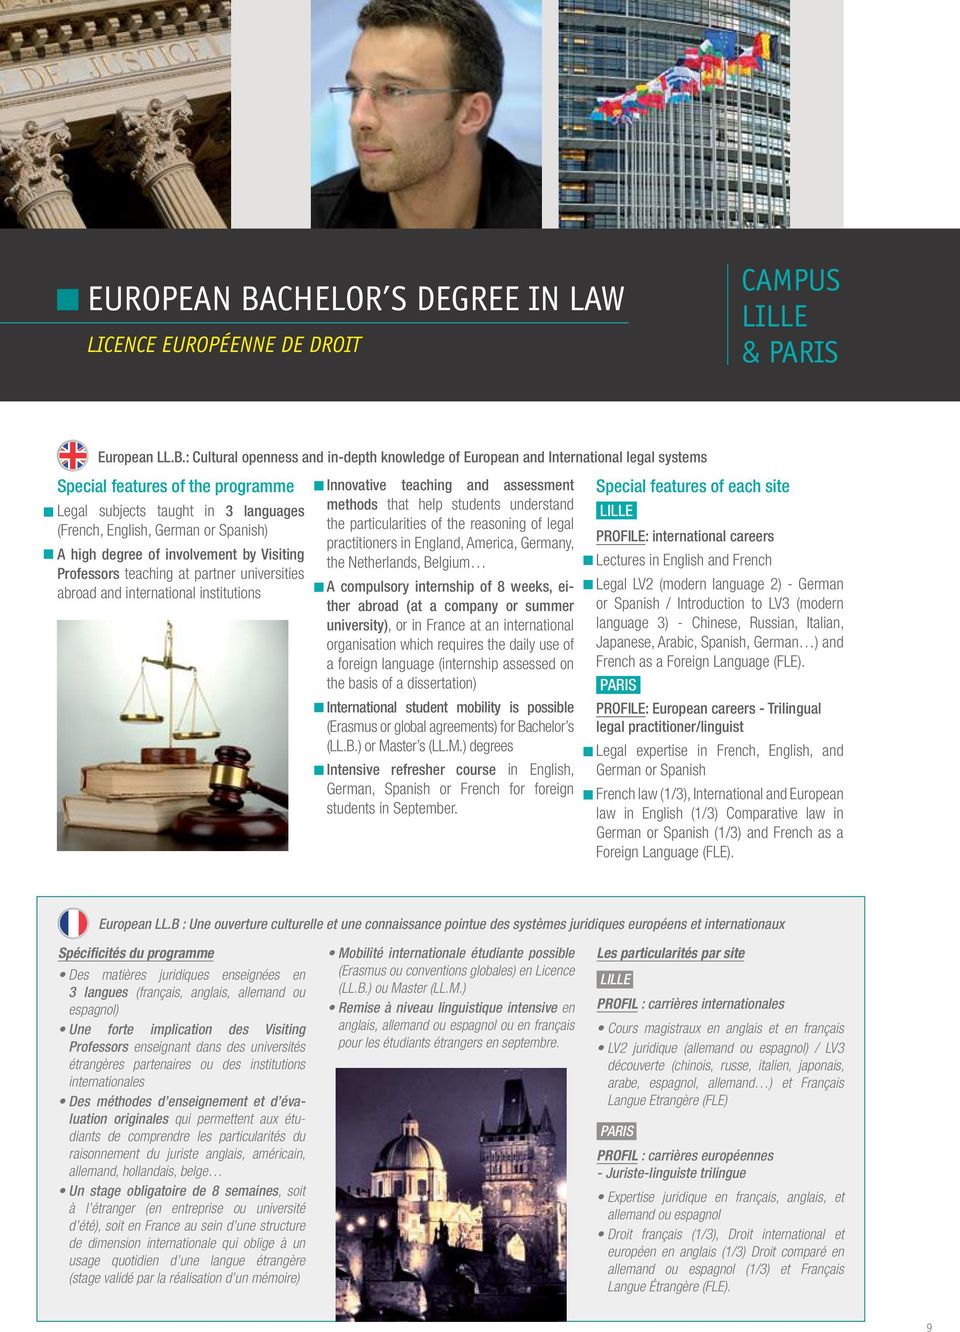 : Cultural openness and in-depth knowledge of European and International legal systems Special features of the programme Legal subjects taught in 3 languages (French, English, German or Spanish) A